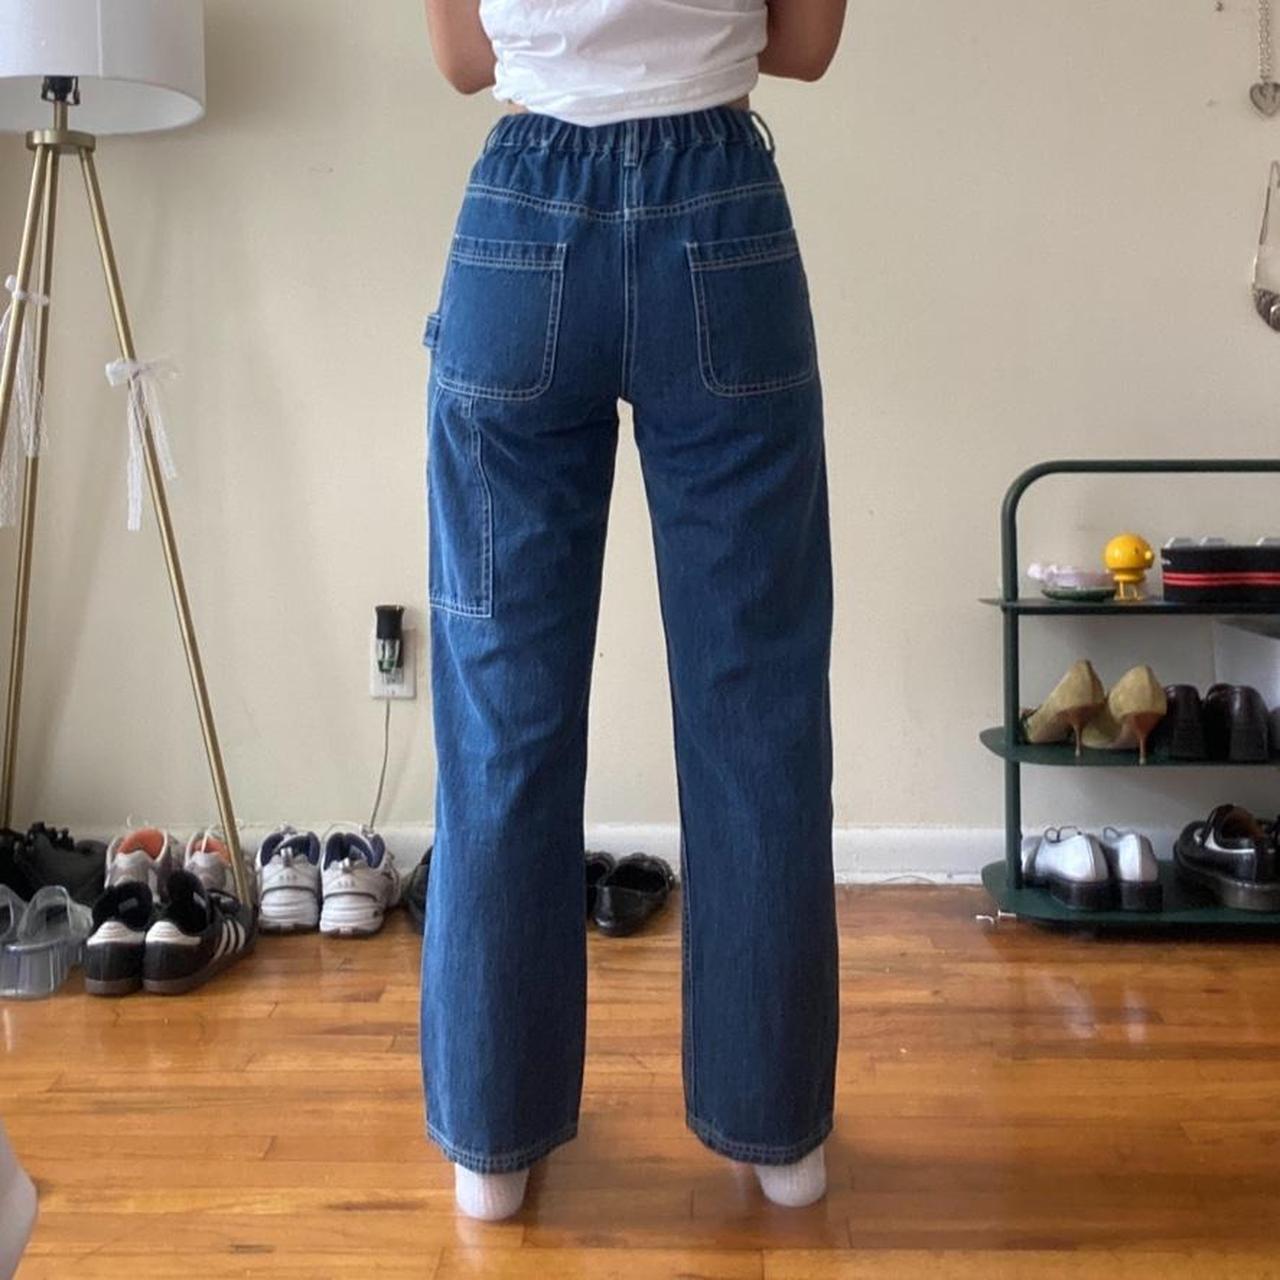 Wray Women's Blue and White Jeans | Depop